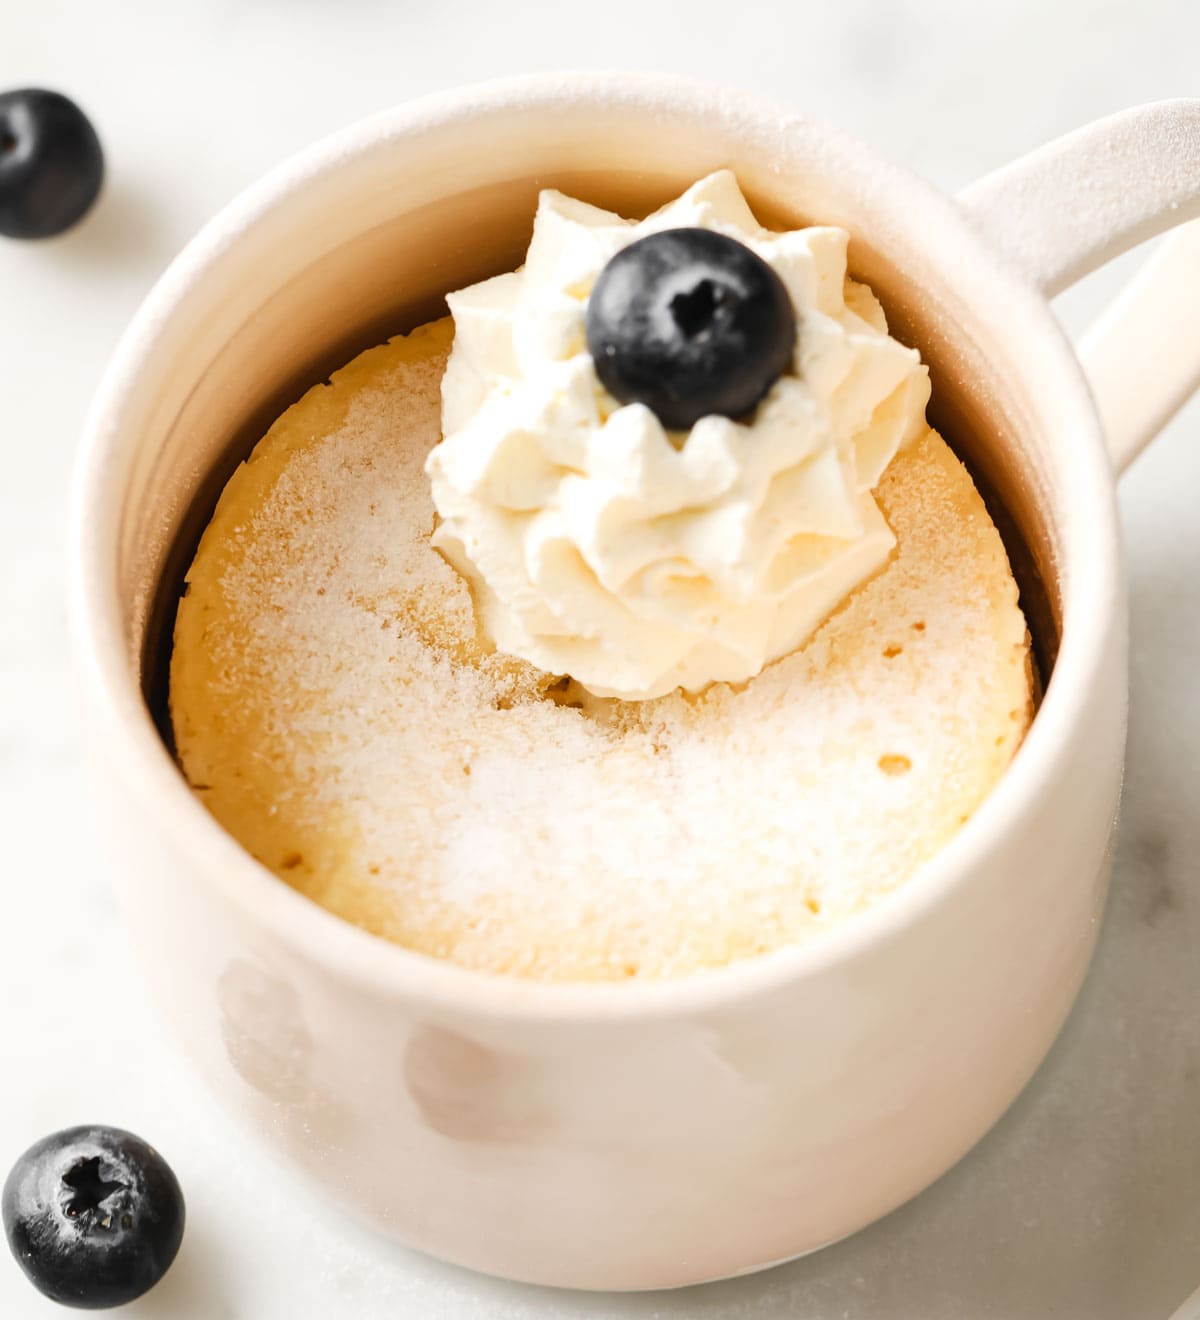 a mug cake with a dollop of whipped cream and a blueberry